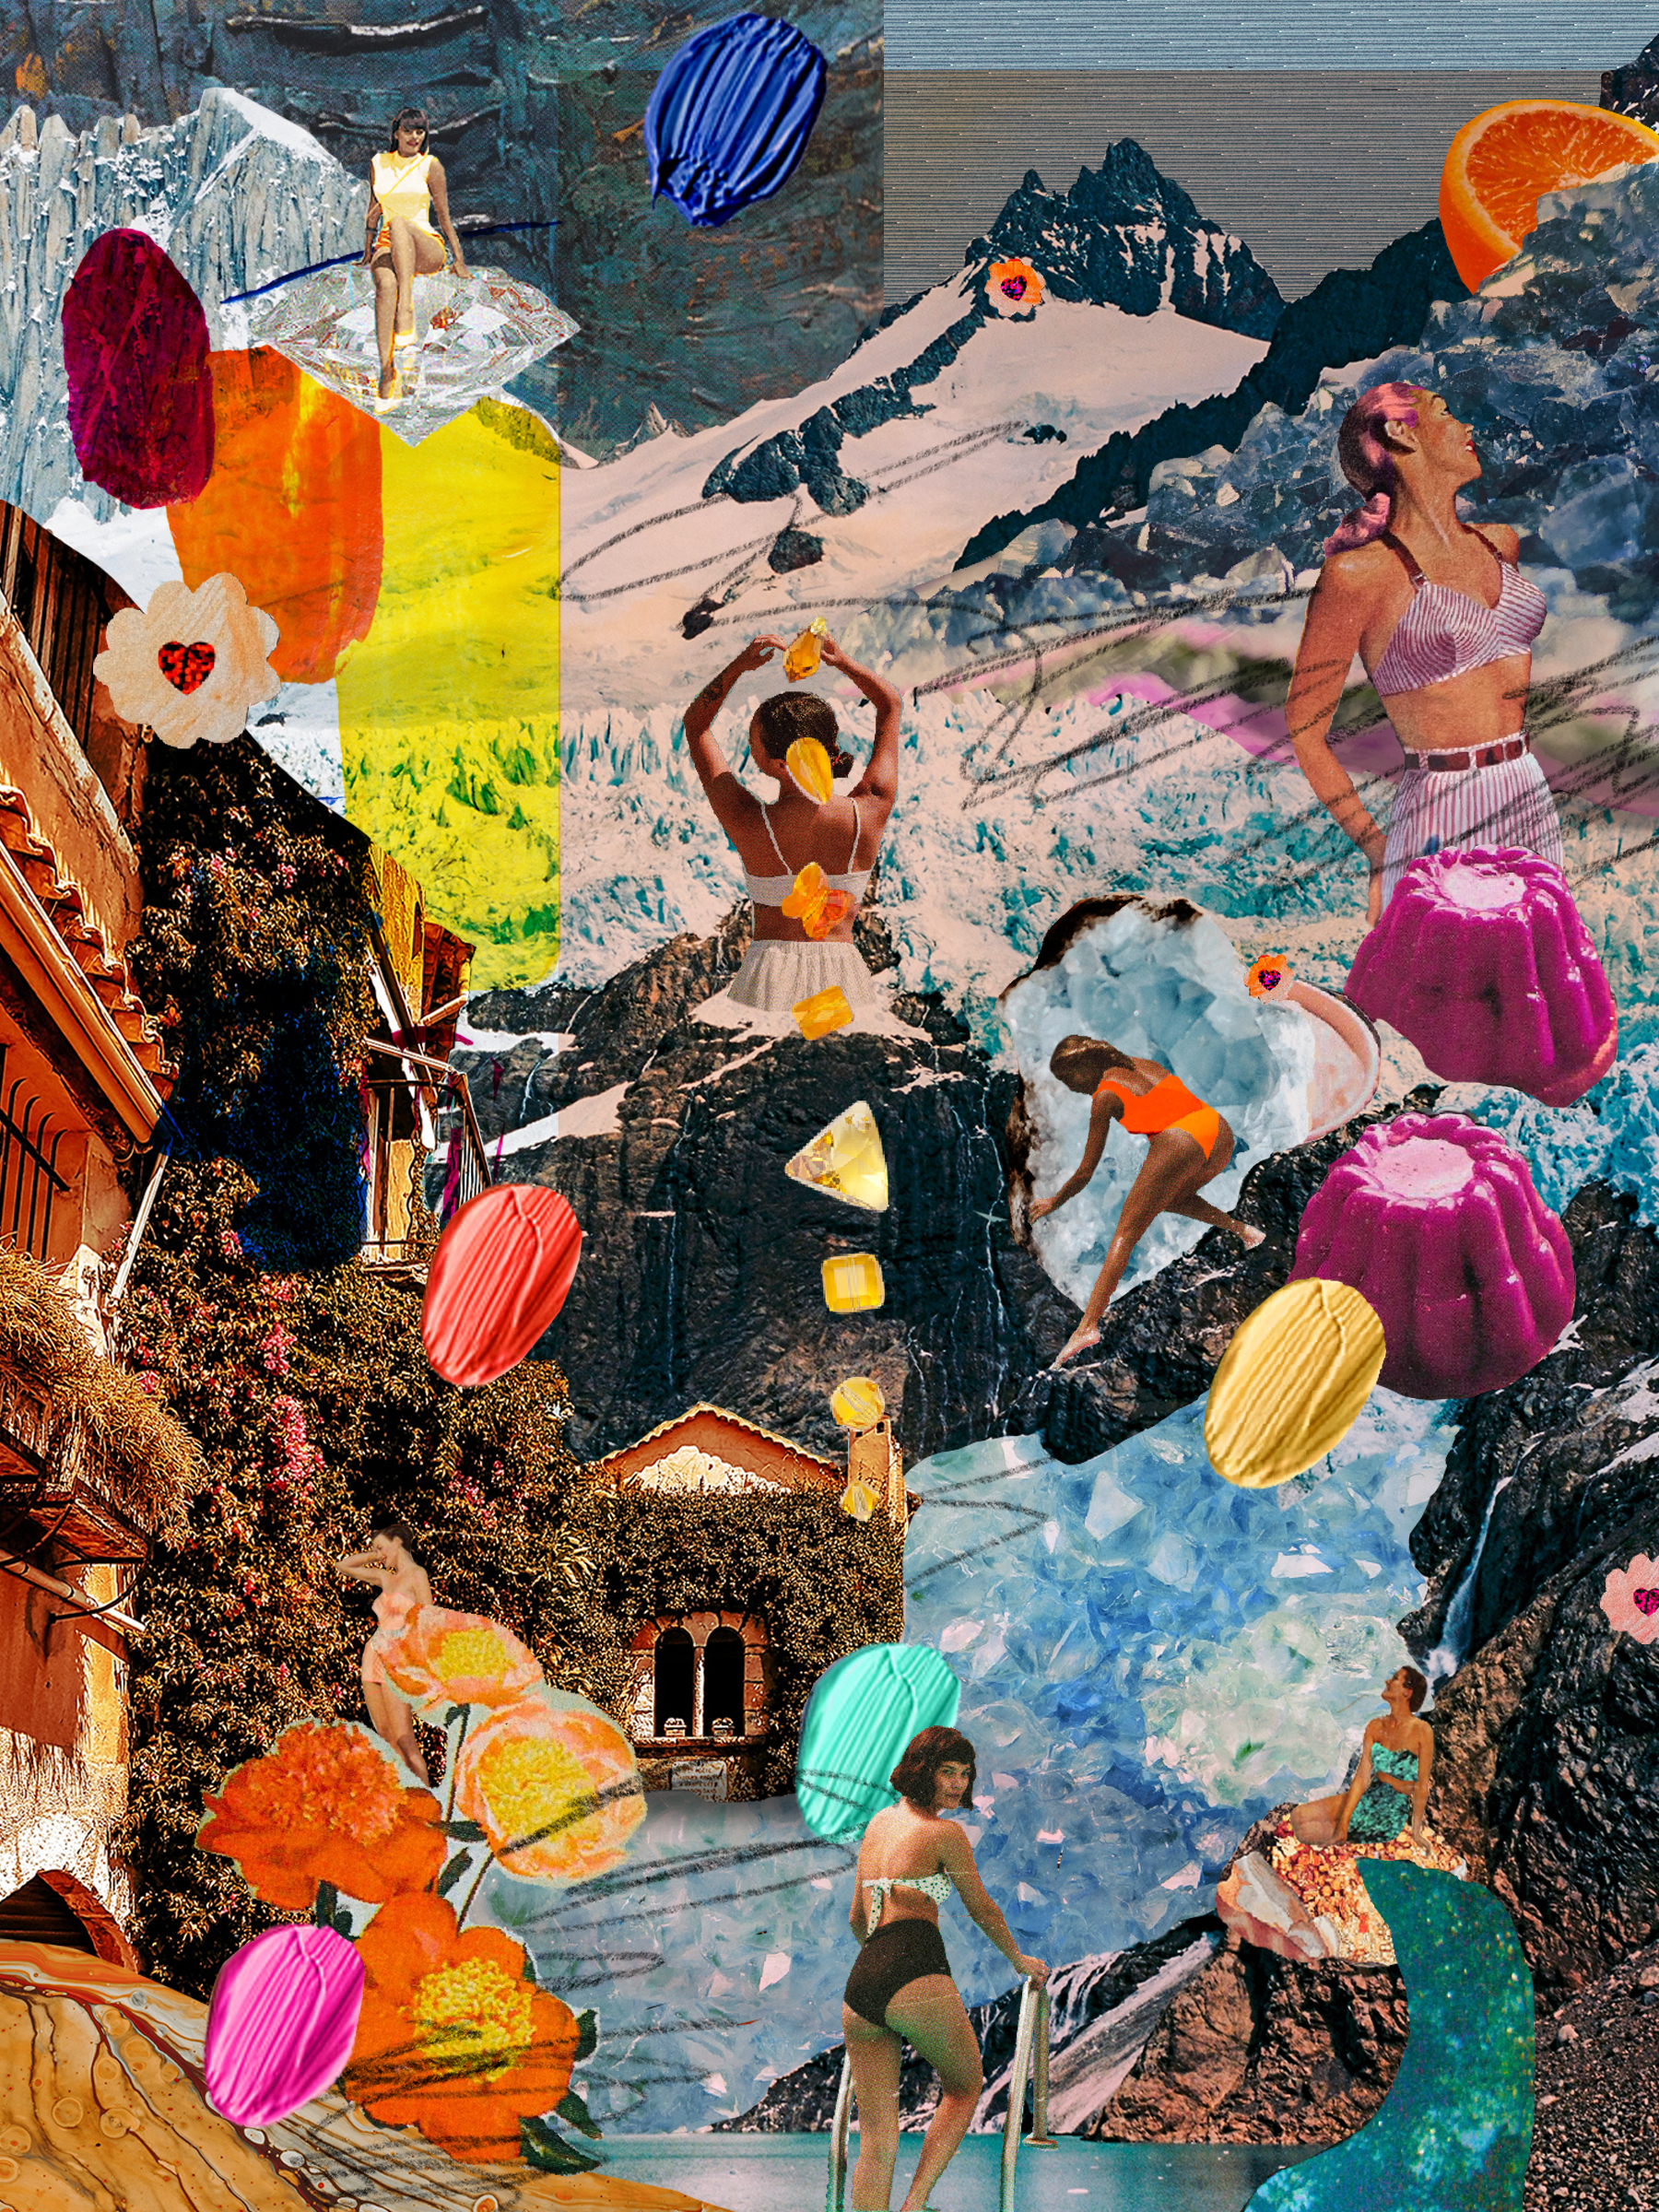 7 Local Collage Artists to Follow on Instagram